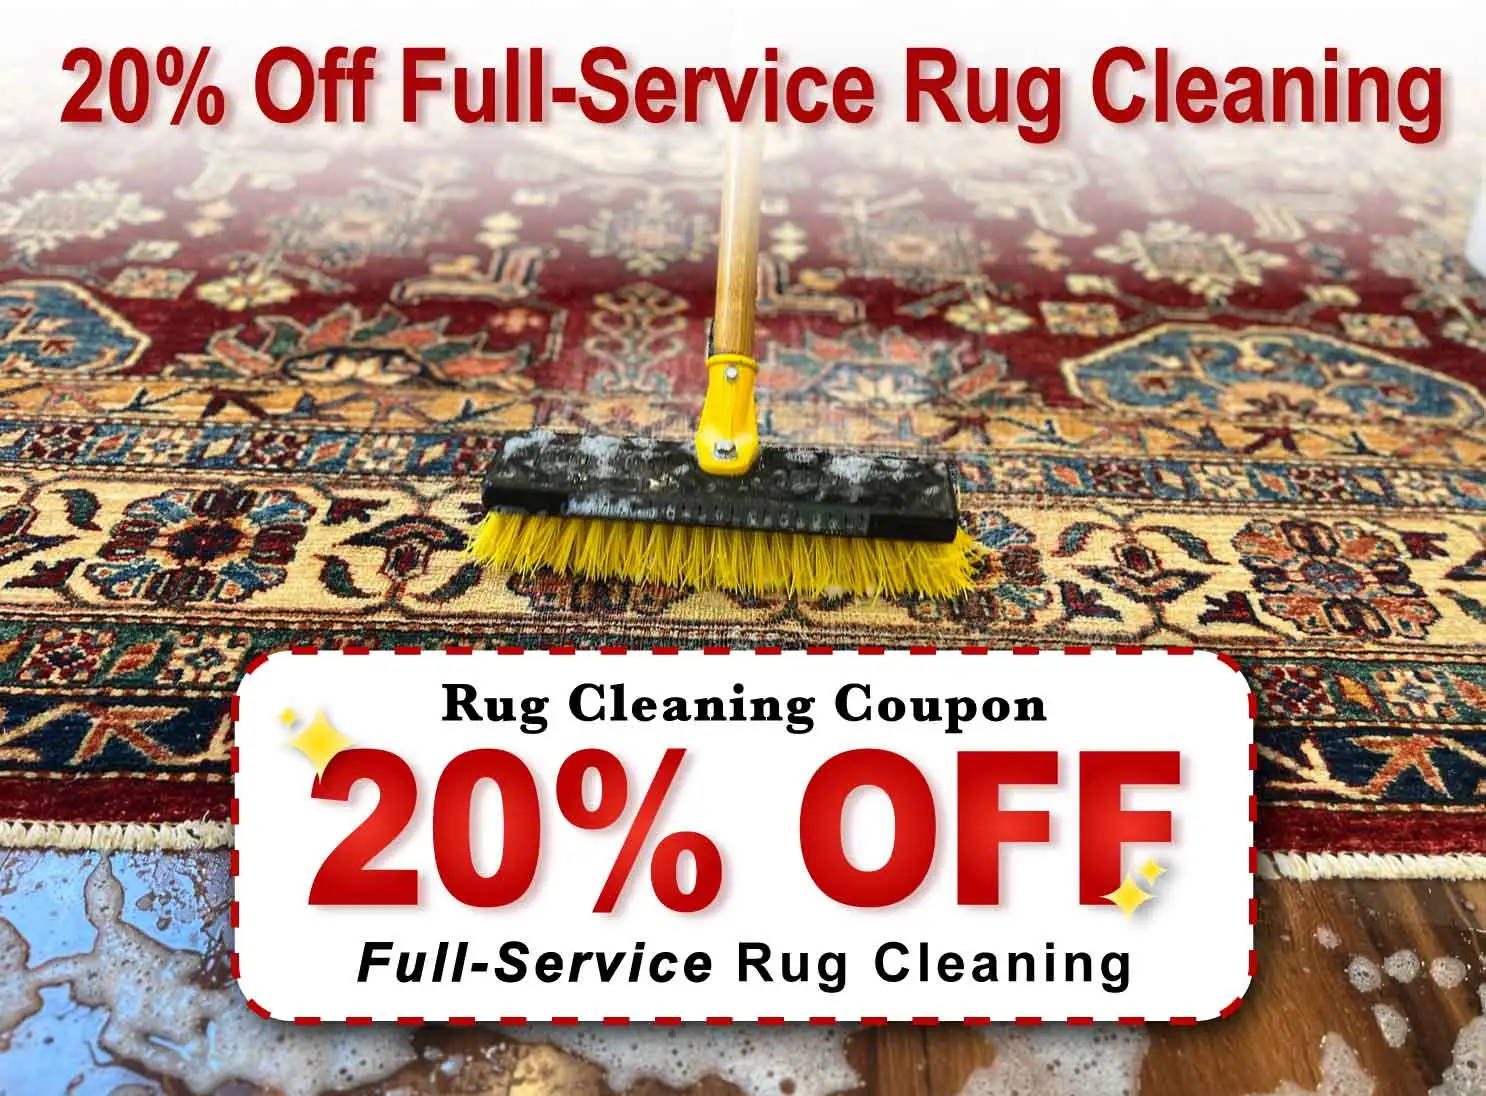 20% off full-service rug cleaning coupon from Kaoud Rugs and Carpet